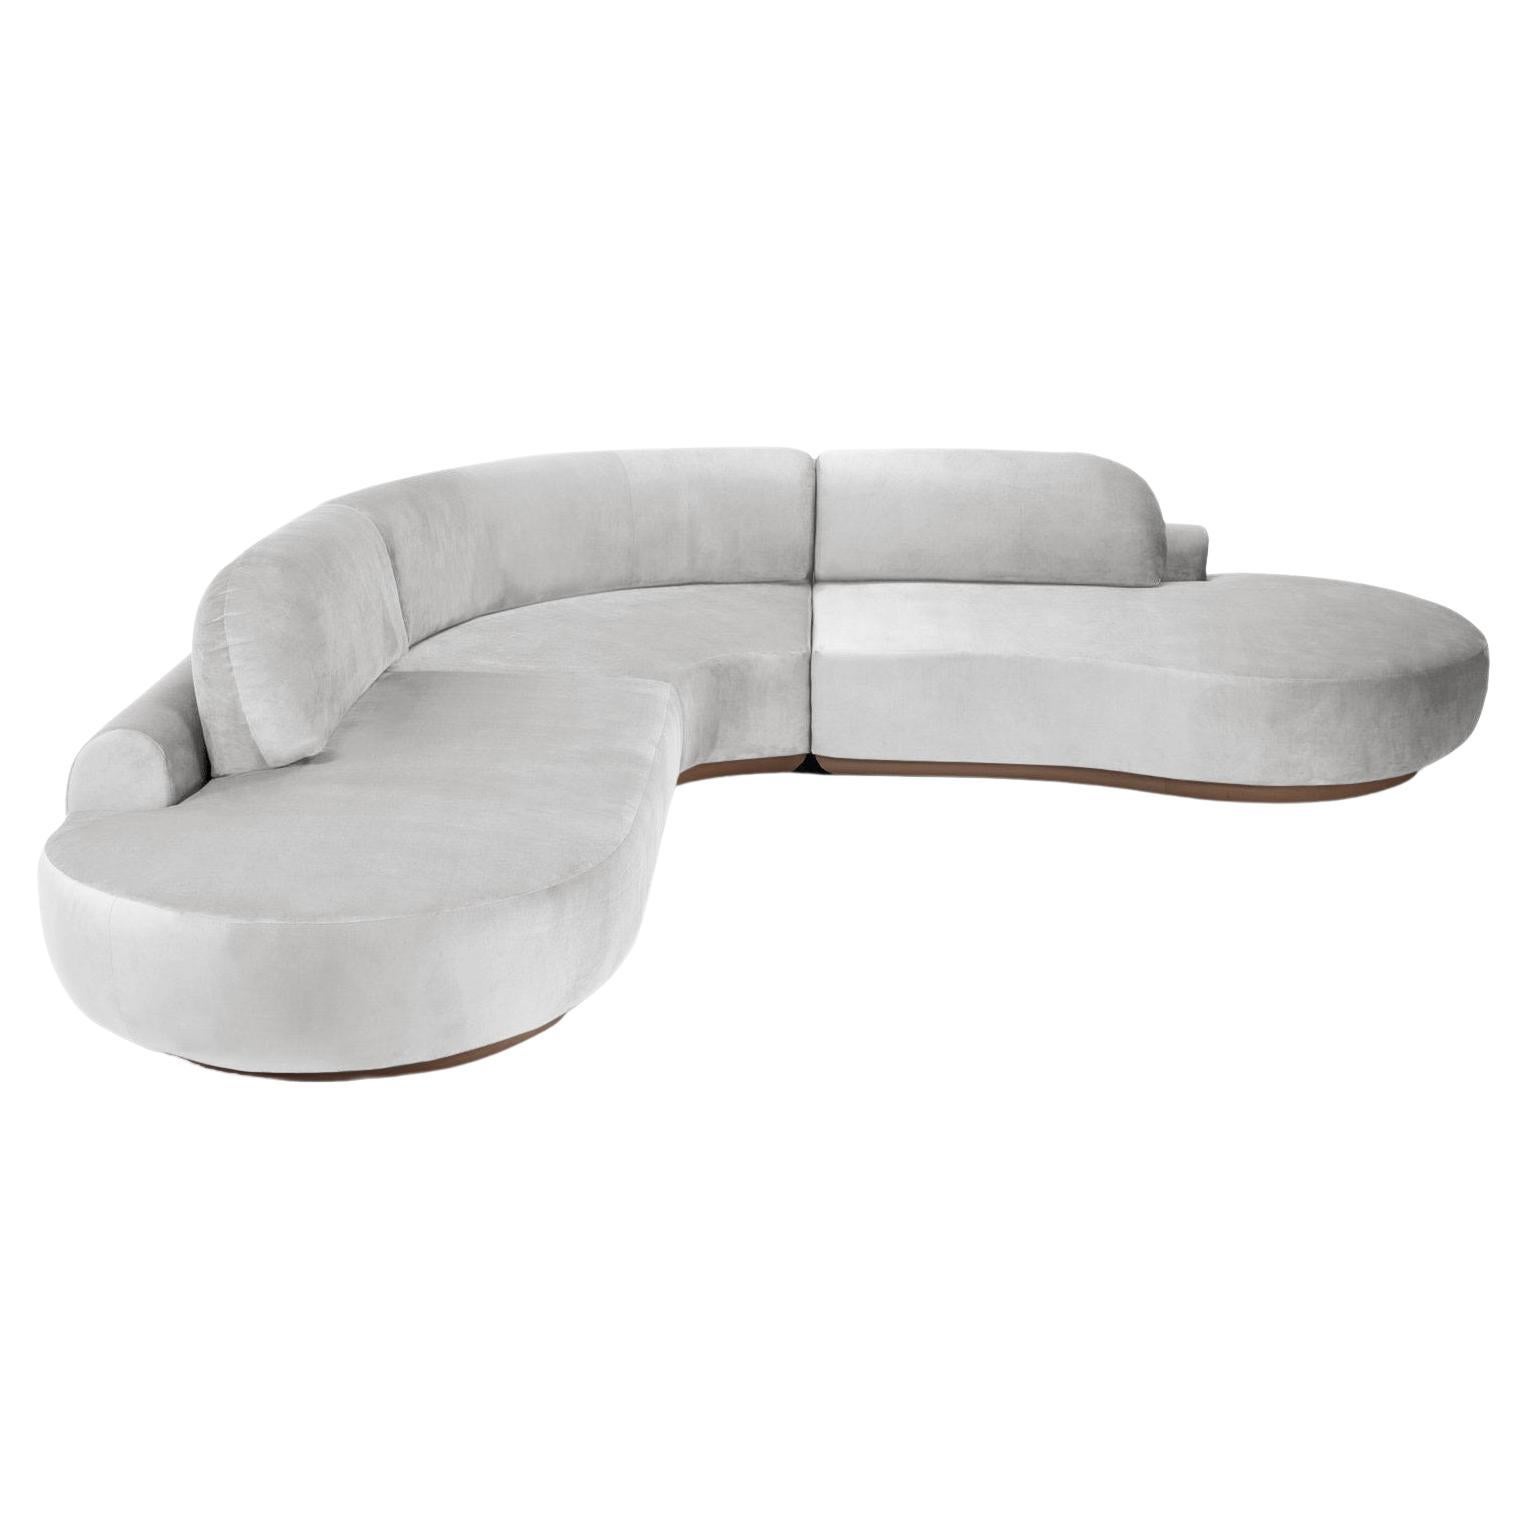 Naked Curved Sectional Sofa, 3 Piece with Beech Ash-056-1 and Aluminium